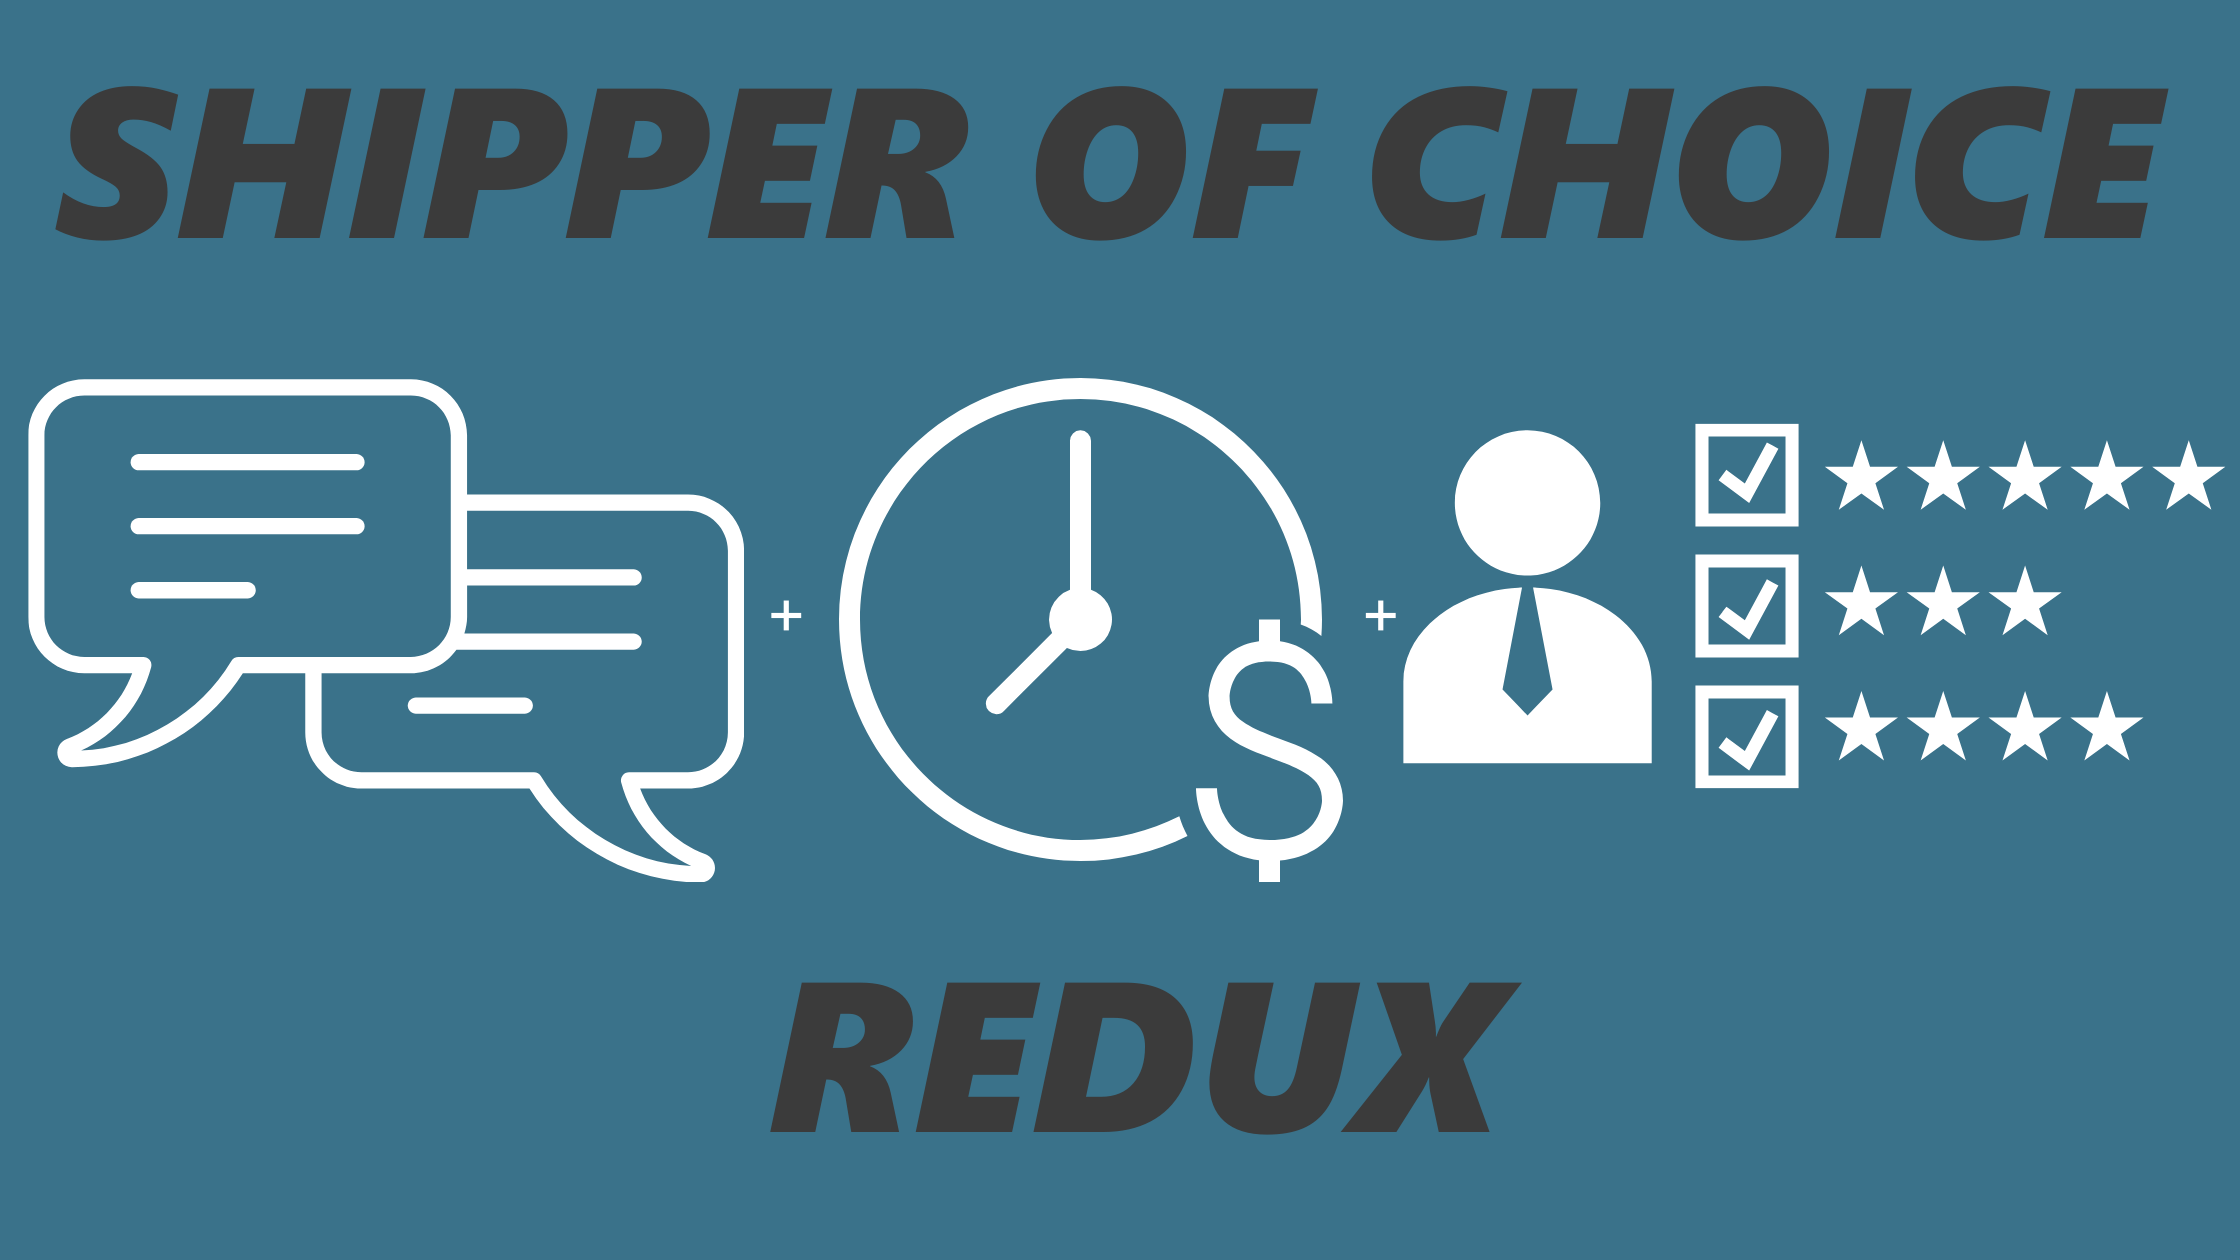 shipper-of-choice-redux-with-communication-icon-payment-on-time-icon-and-key-performance-indicator-icon